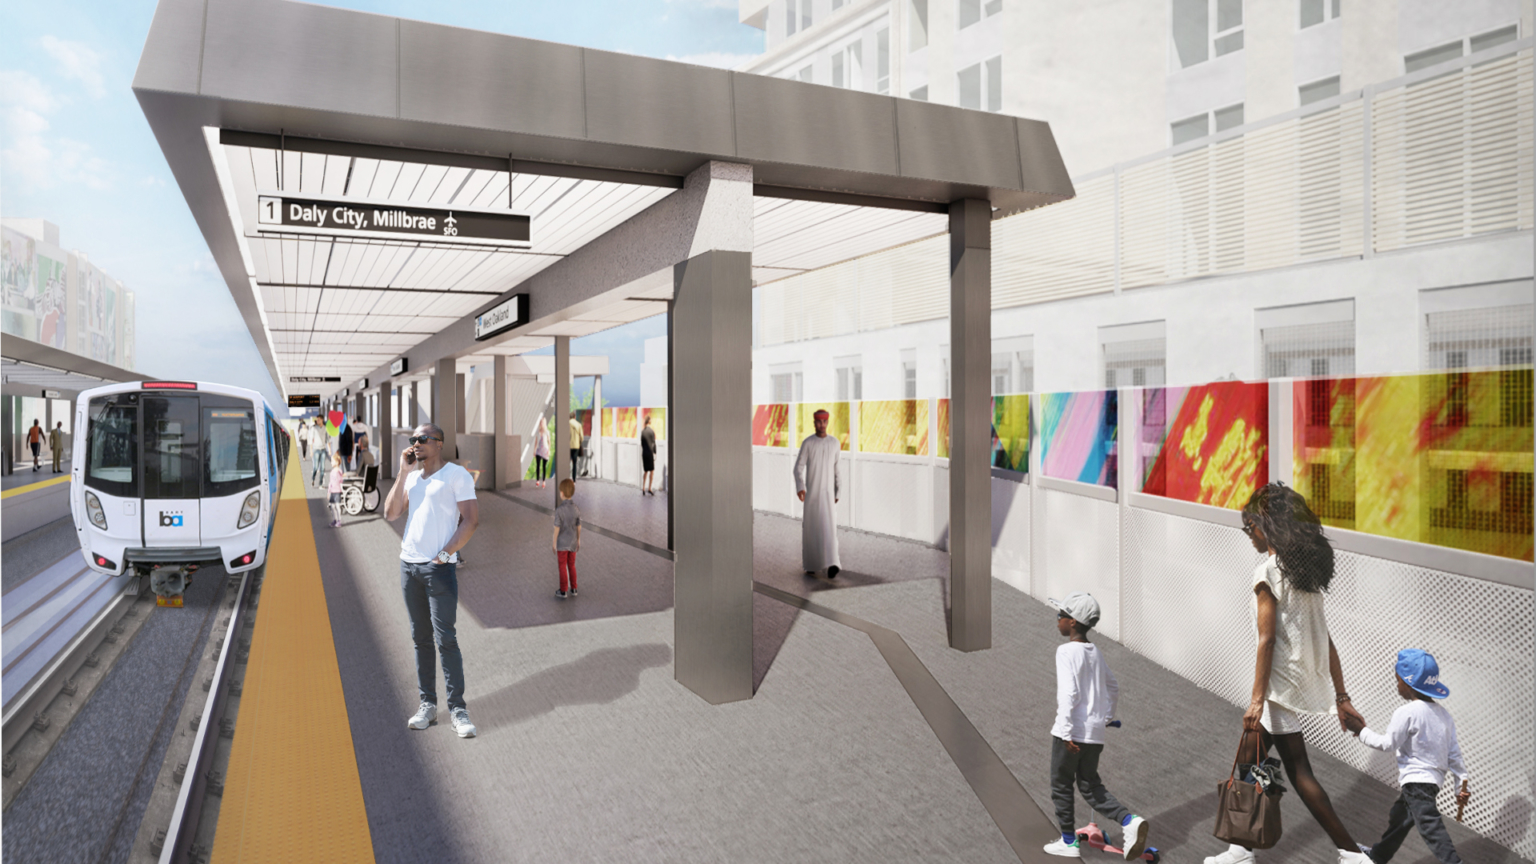 a rendering of a lightrail station with an art mural and shade structure